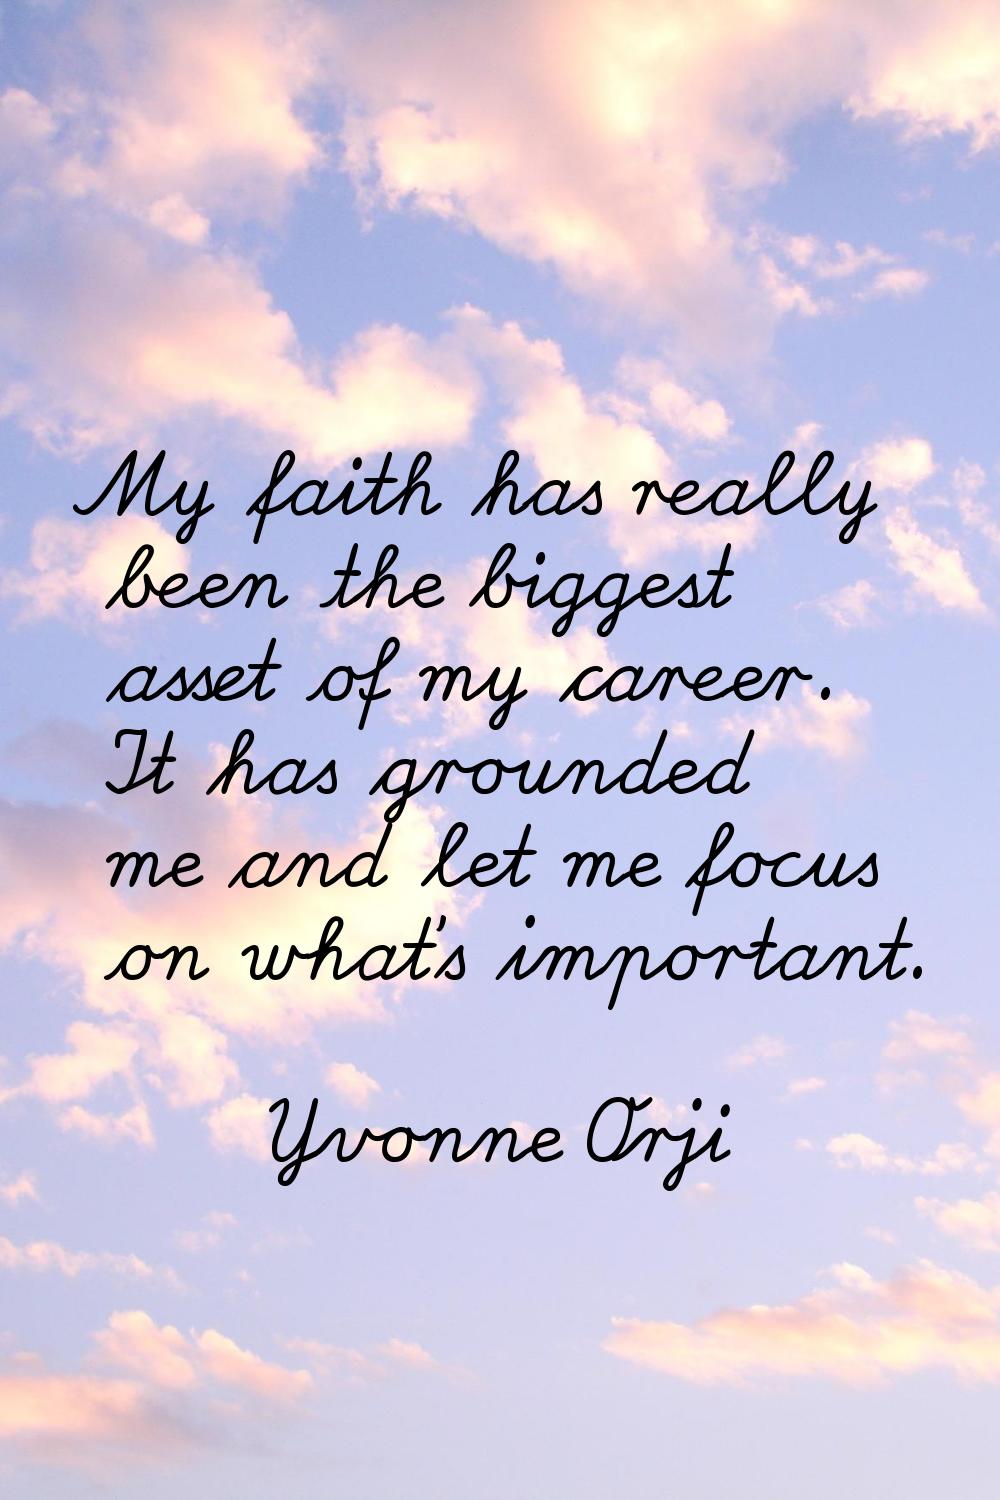 My faith has really been the biggest asset of my career. It has grounded me and let me focus on wha